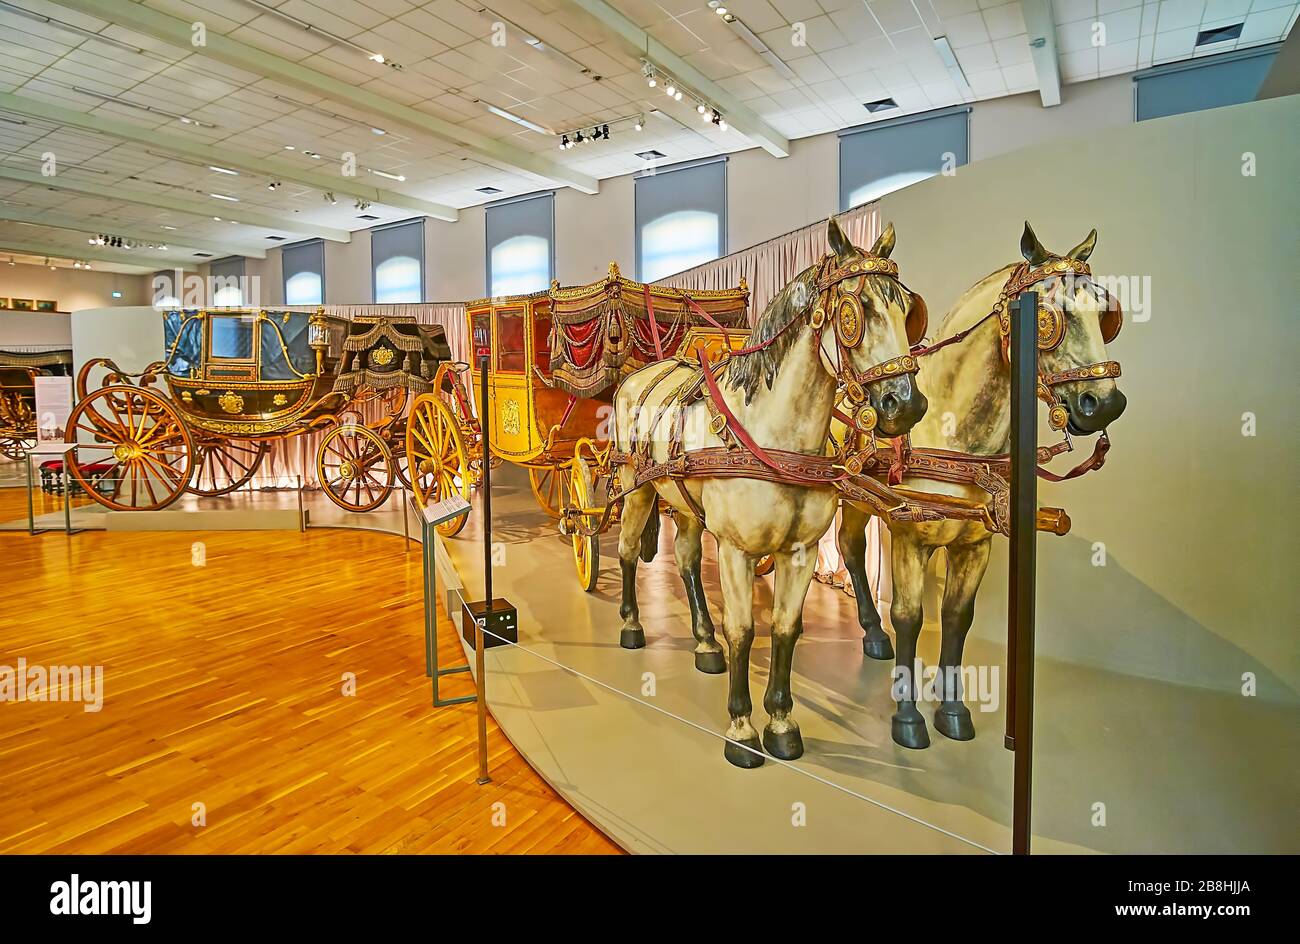 VIENNA, AUSTRIA - FEBRUARY 19, 2019: Interior of Imperial Carriage museum of Schonbrunn with extant carriages of Habsburg family and horse replicas, o Stock Photo